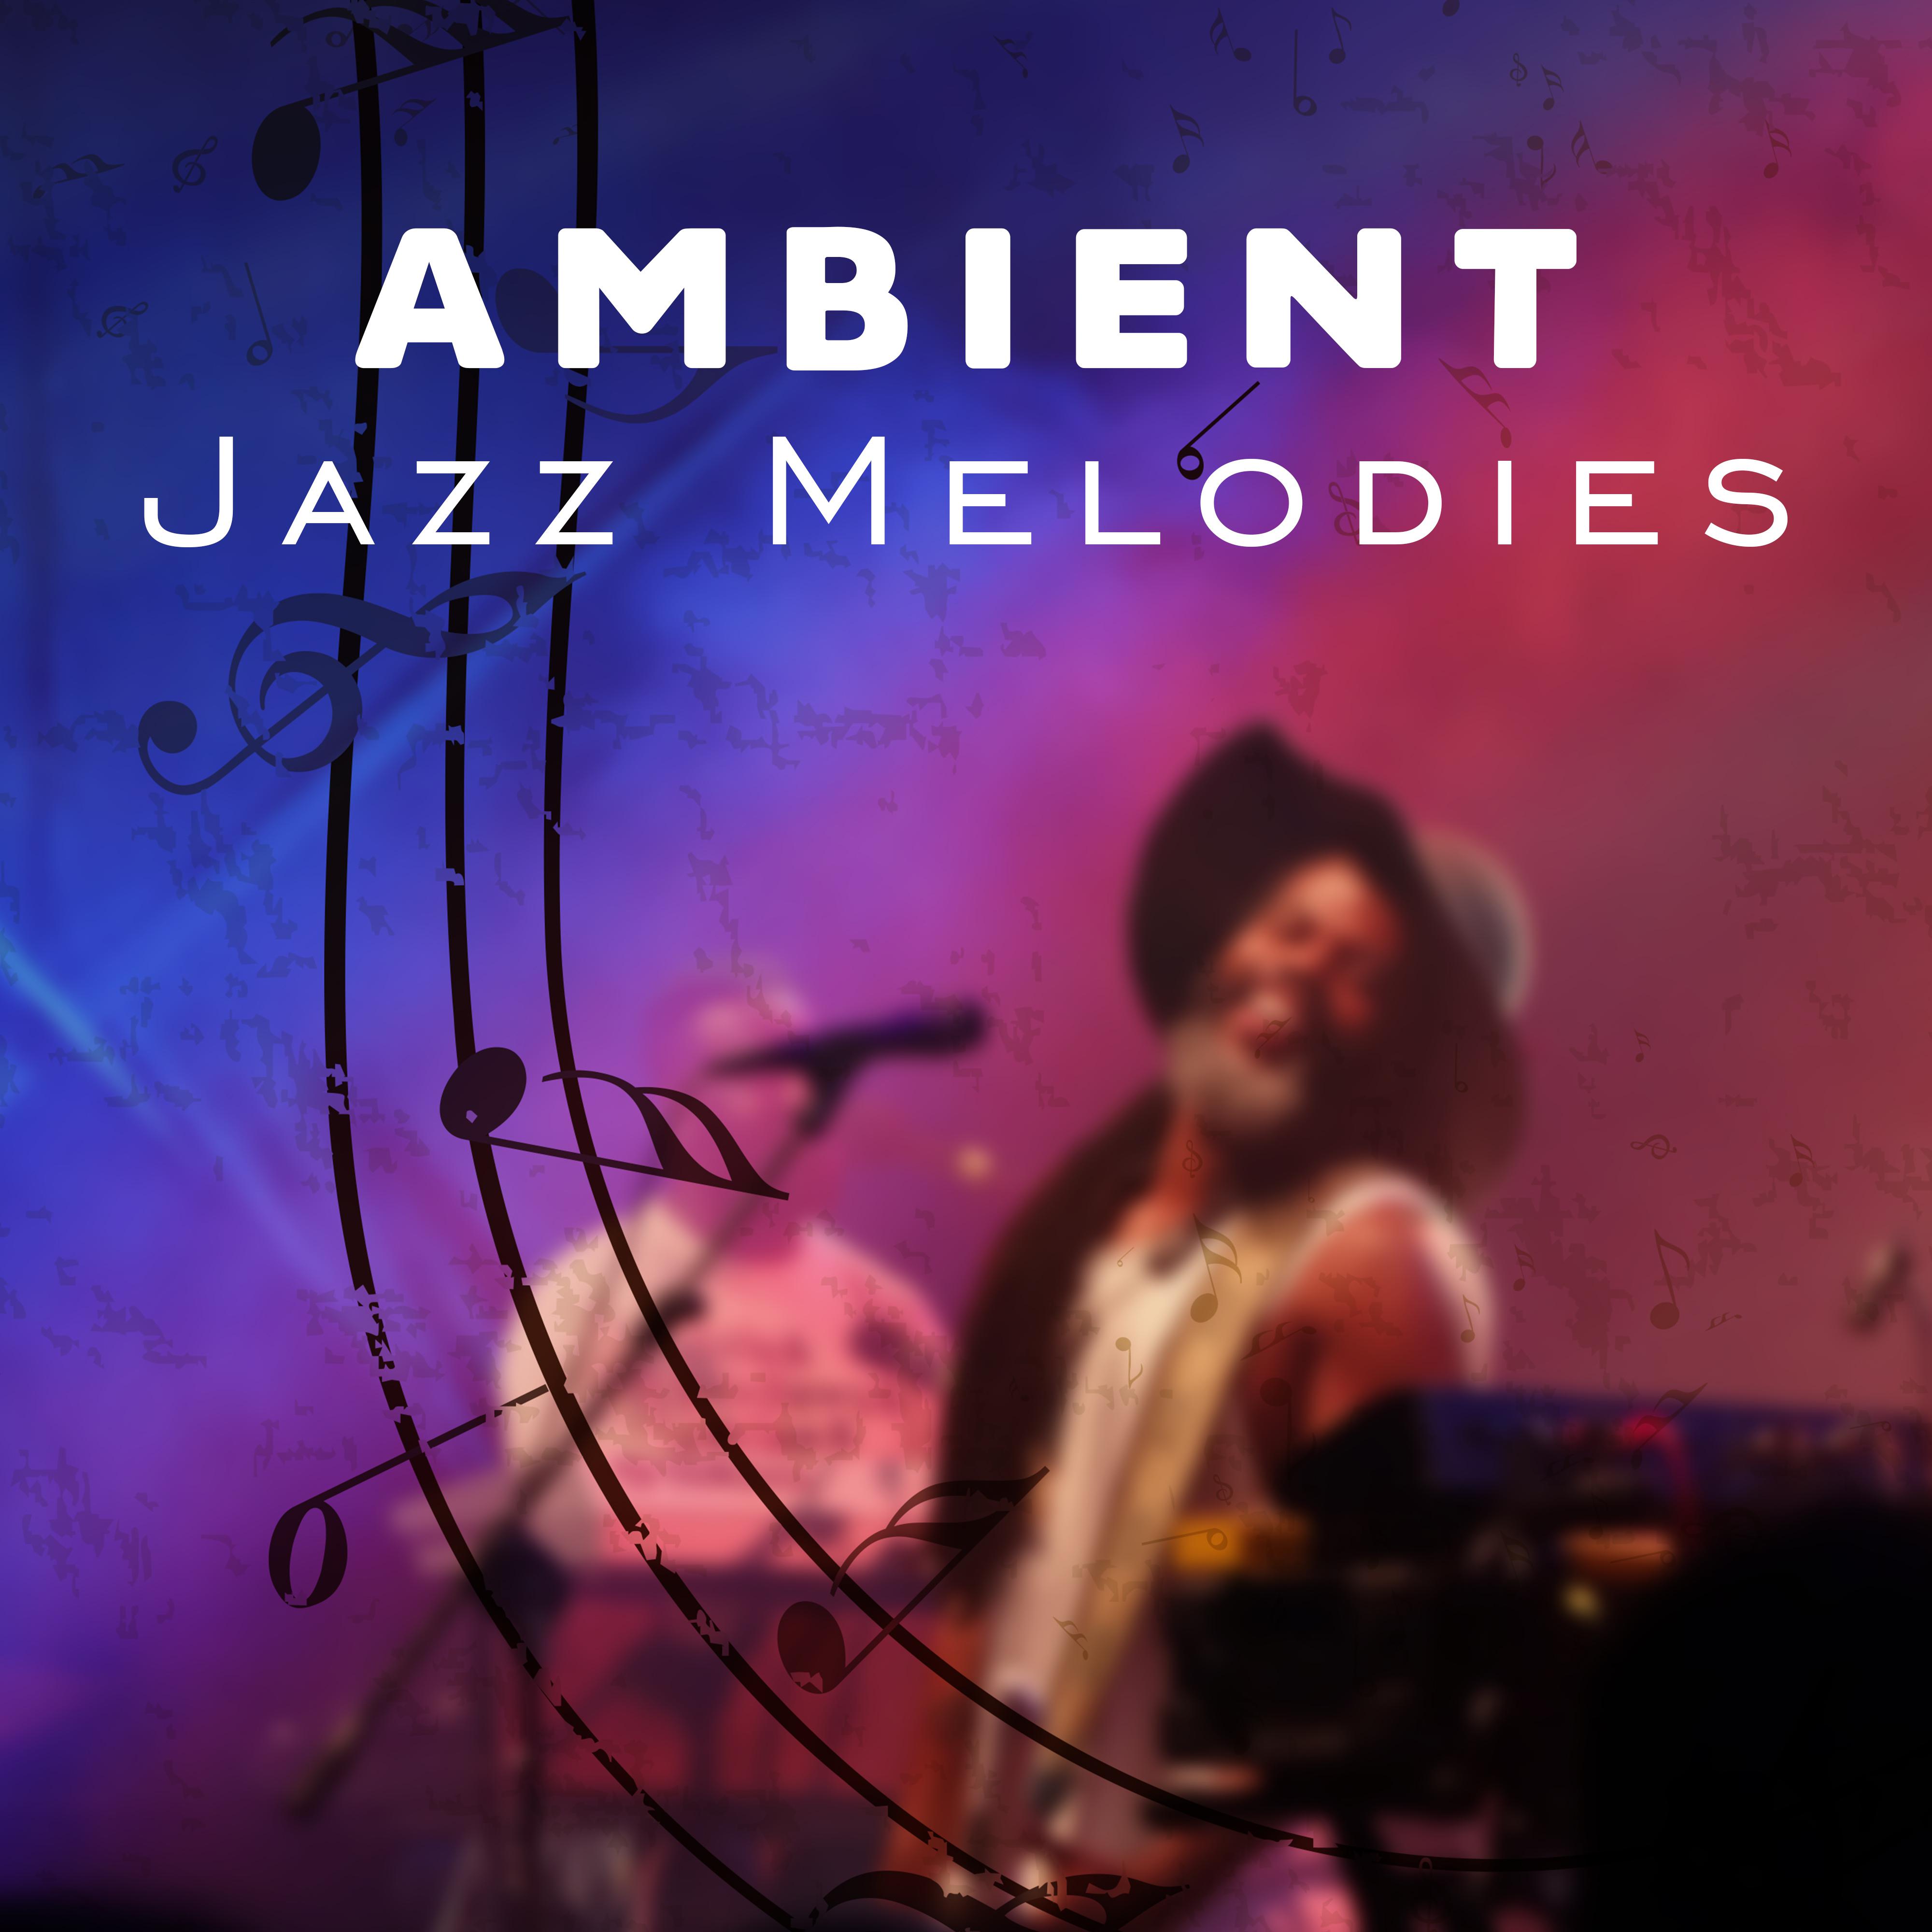 Ambient Jazz Melodies  Smooth Piano Note, Instrumental Jazz Music, Sounds for Night Relaxation